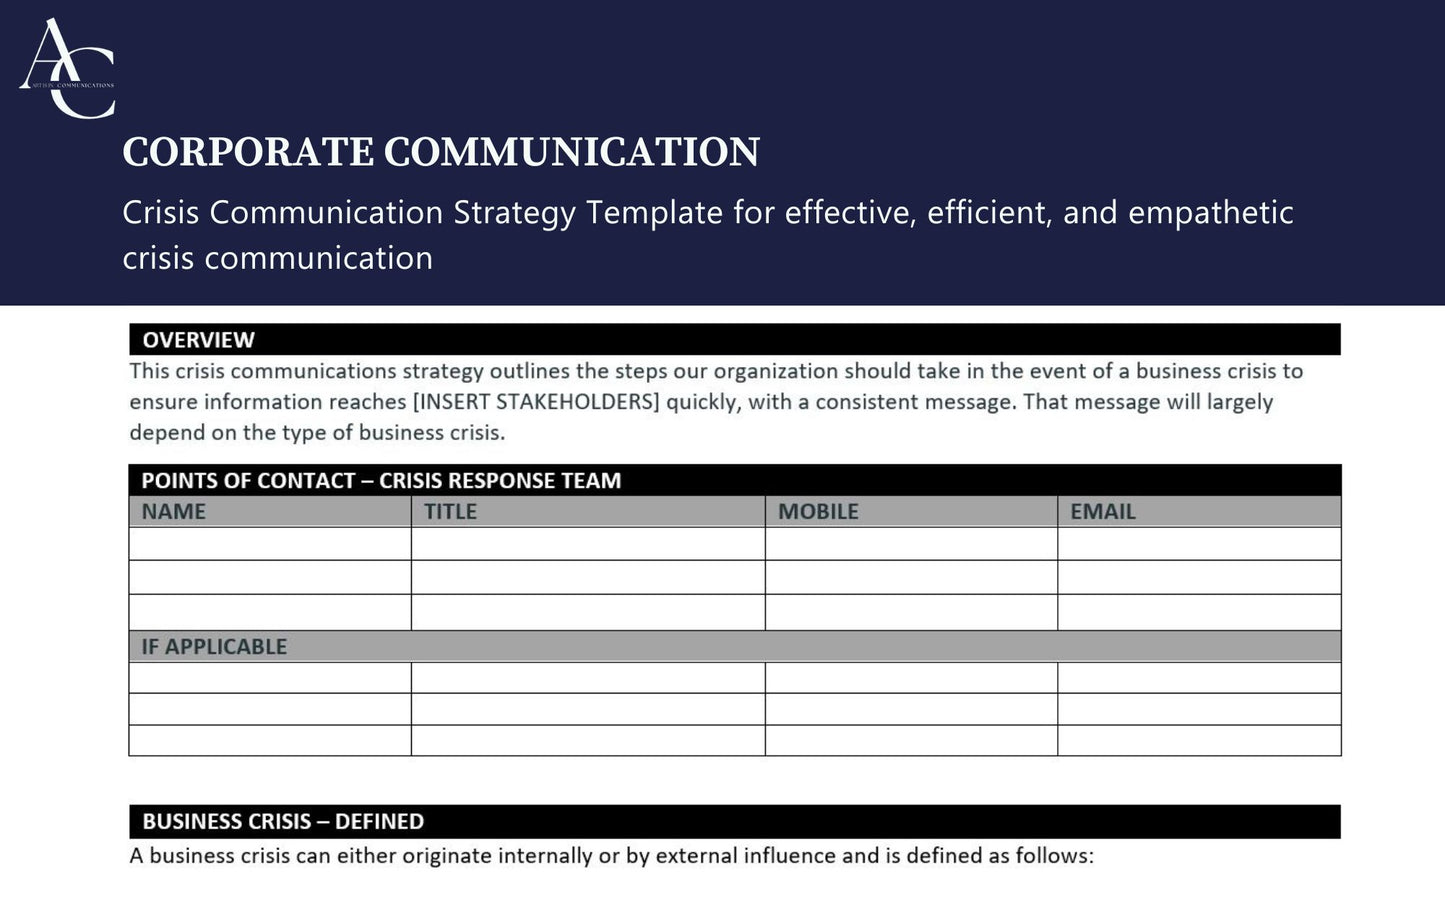 Crisis Communications Strategy Template